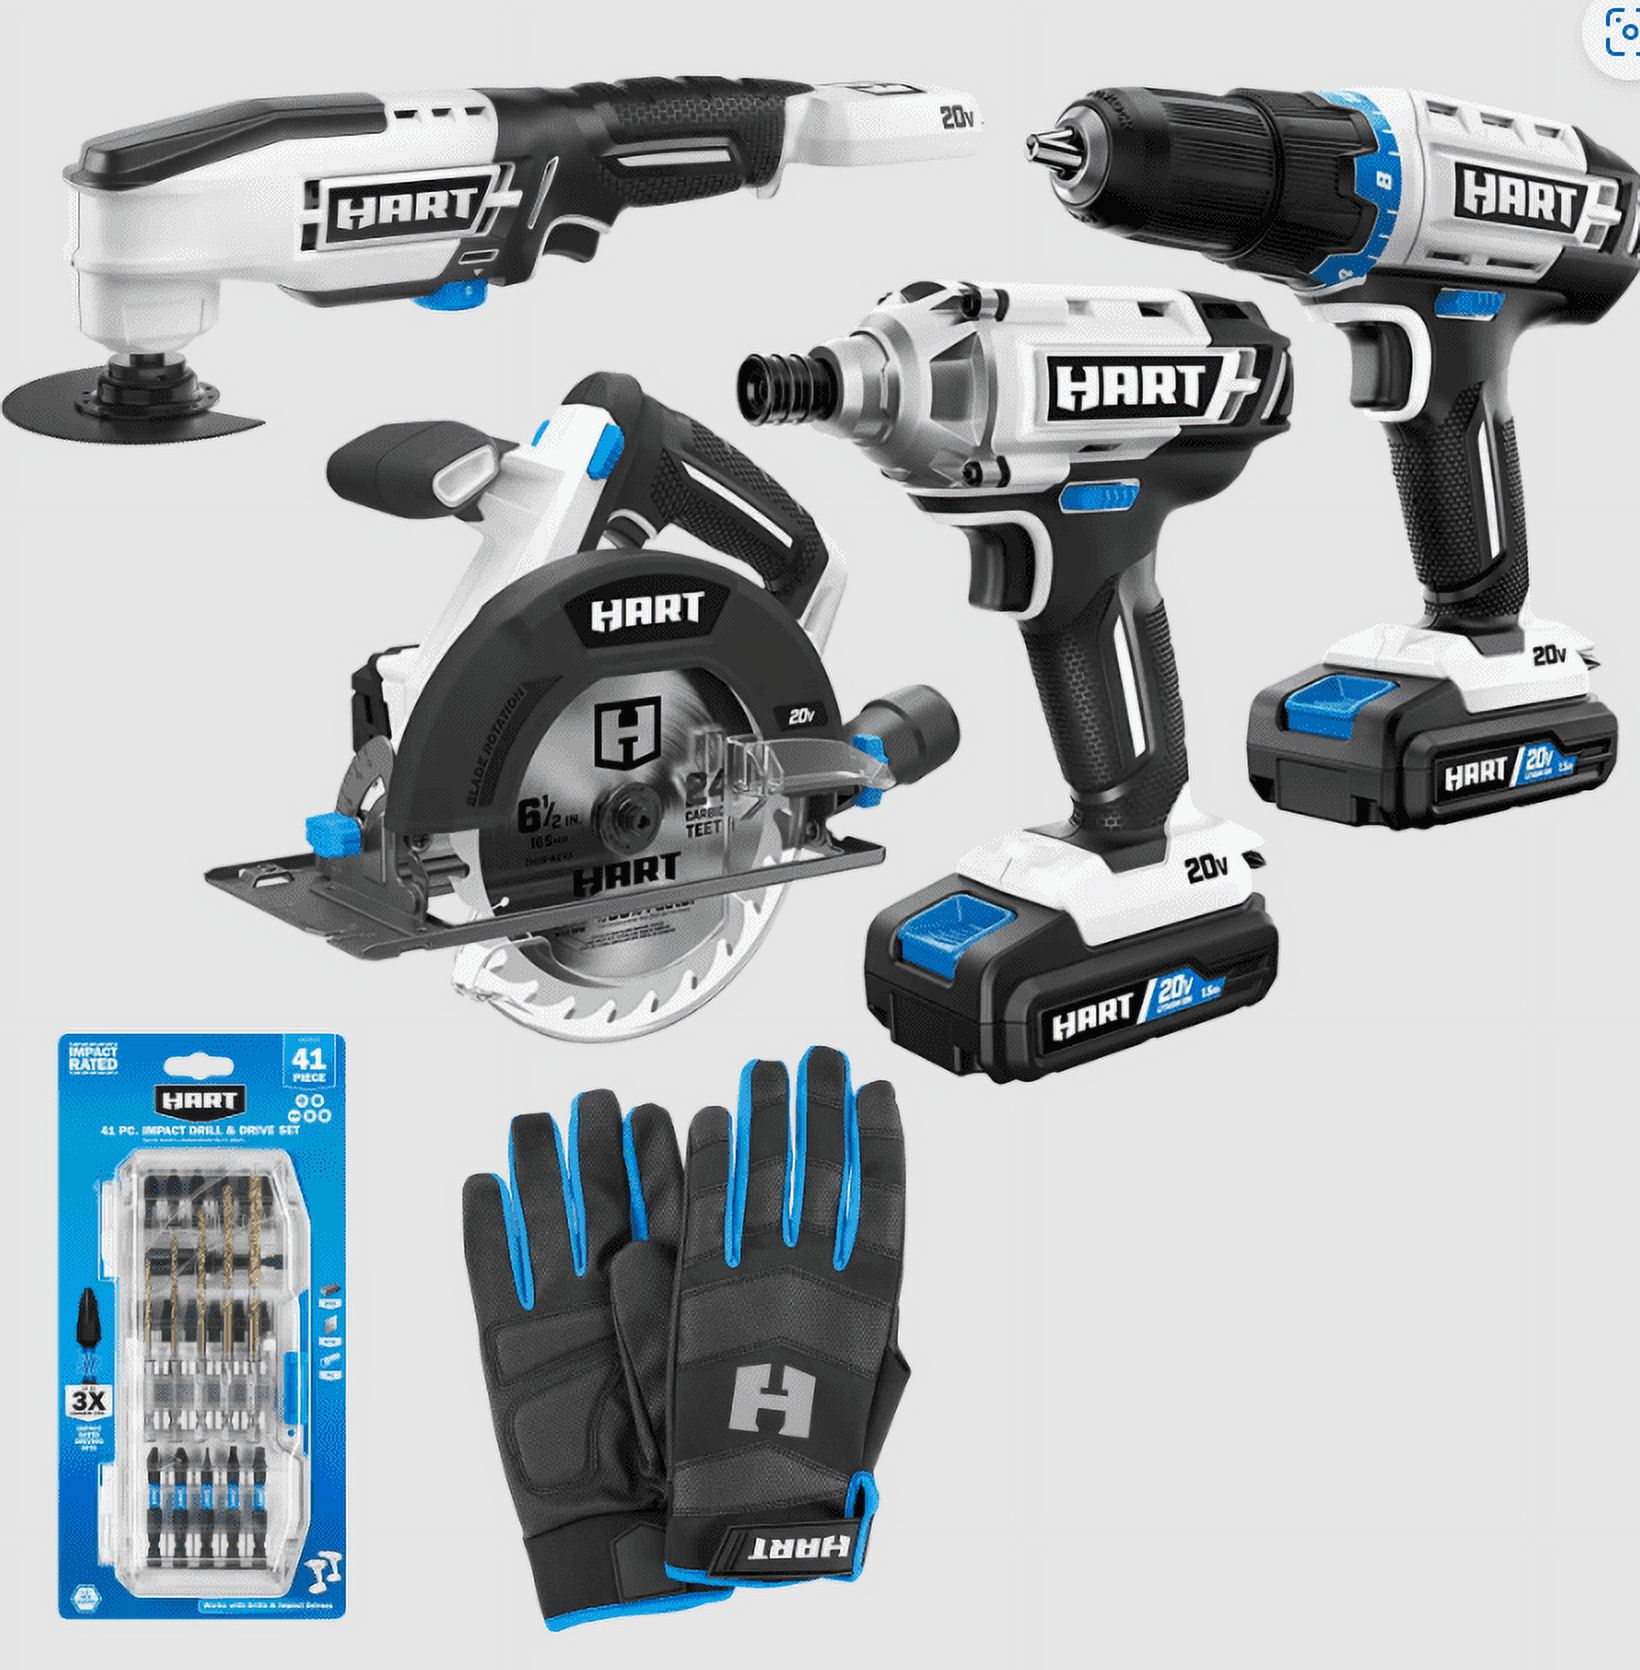 HART Father's Day Bundle 20V Tool Combo Kit, Oscillating Multitool w/  Accessories, 41Pc Impact Drill  Drive Set,  Performance Fit (L) Work  Gloves (2), 20V 2Ah Lithium-Ion Batteries